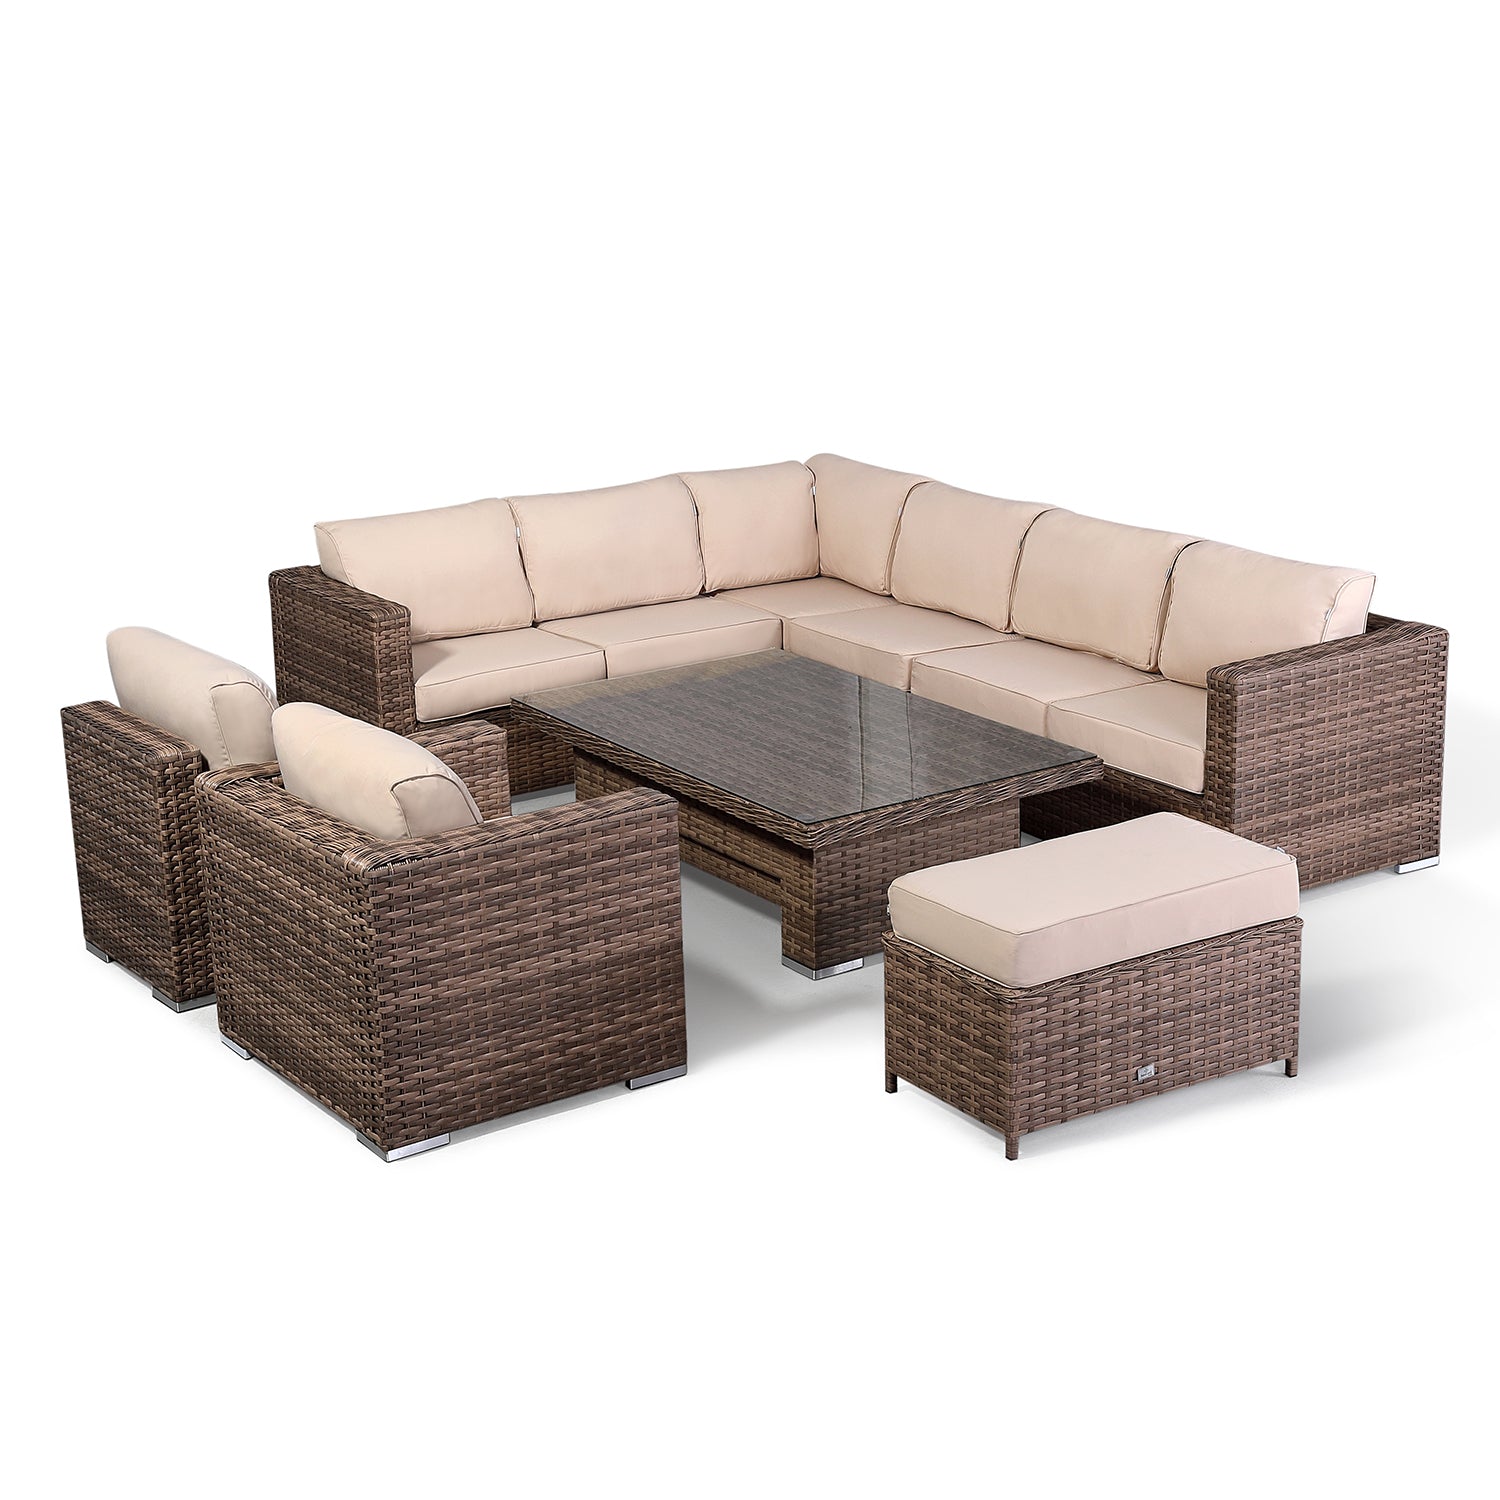 Durley Elite Modular Corner Sofa Set with Rising Table in Brown weave (#217)